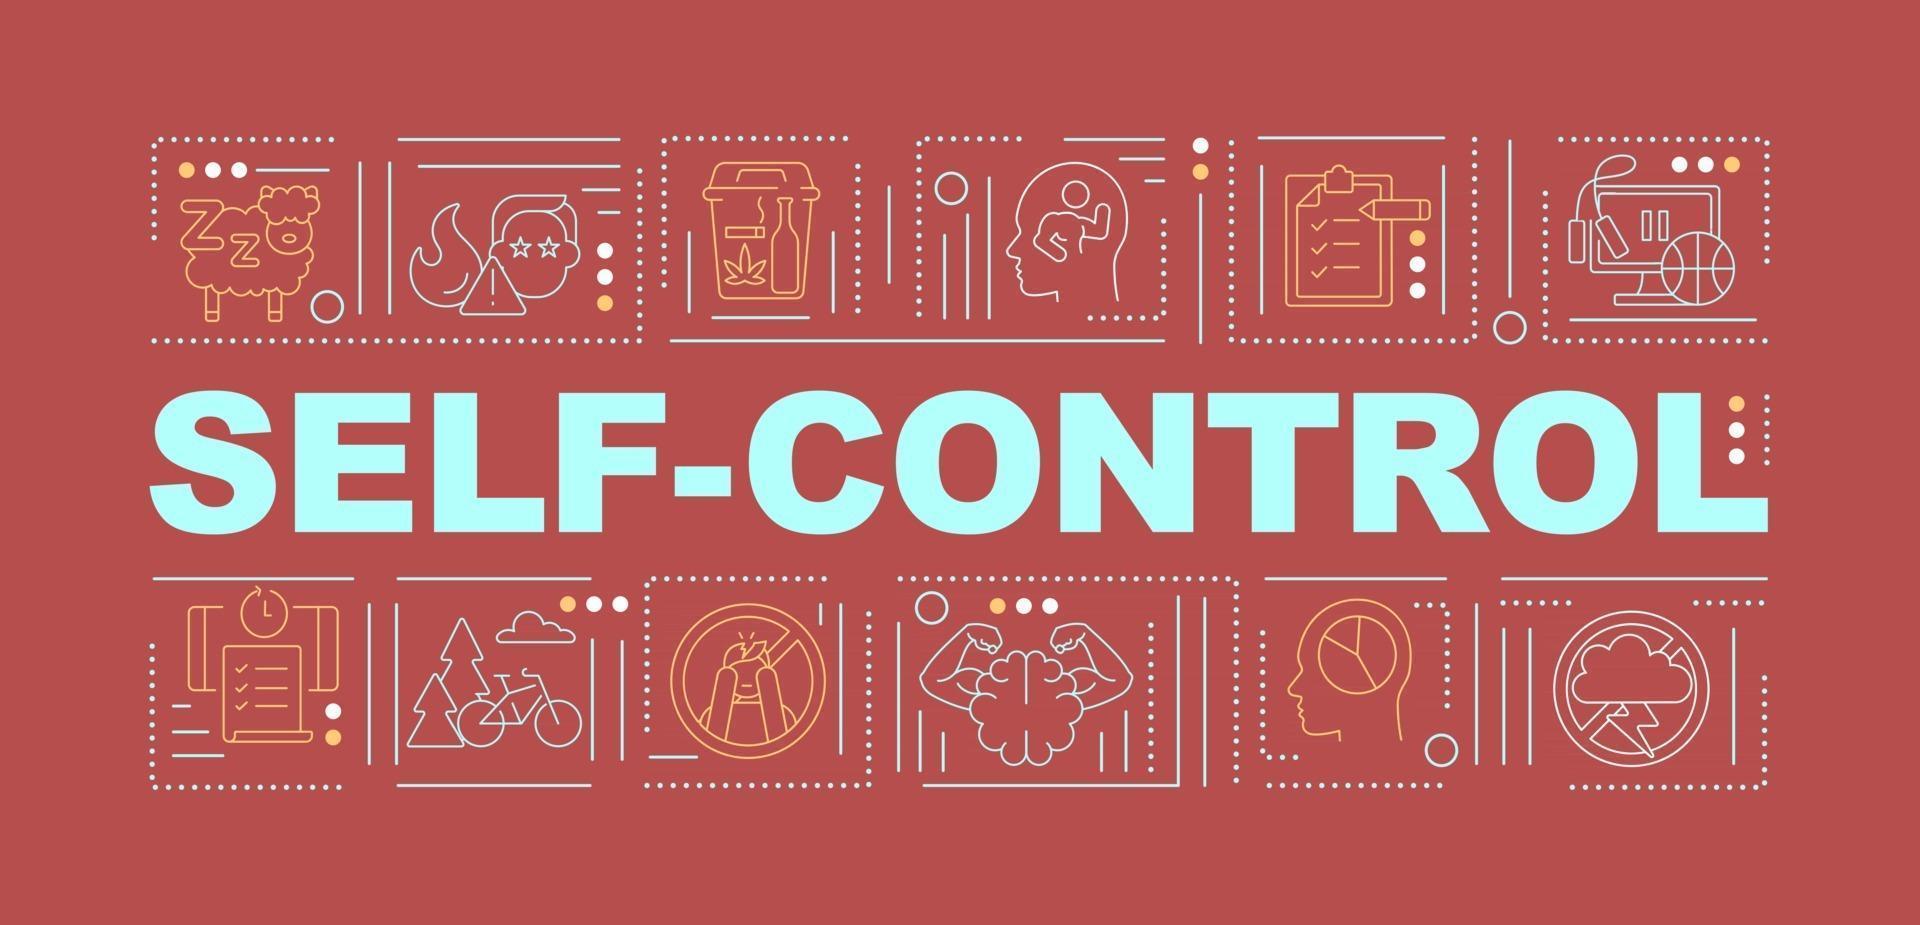 Self control tips word concepts banner vector